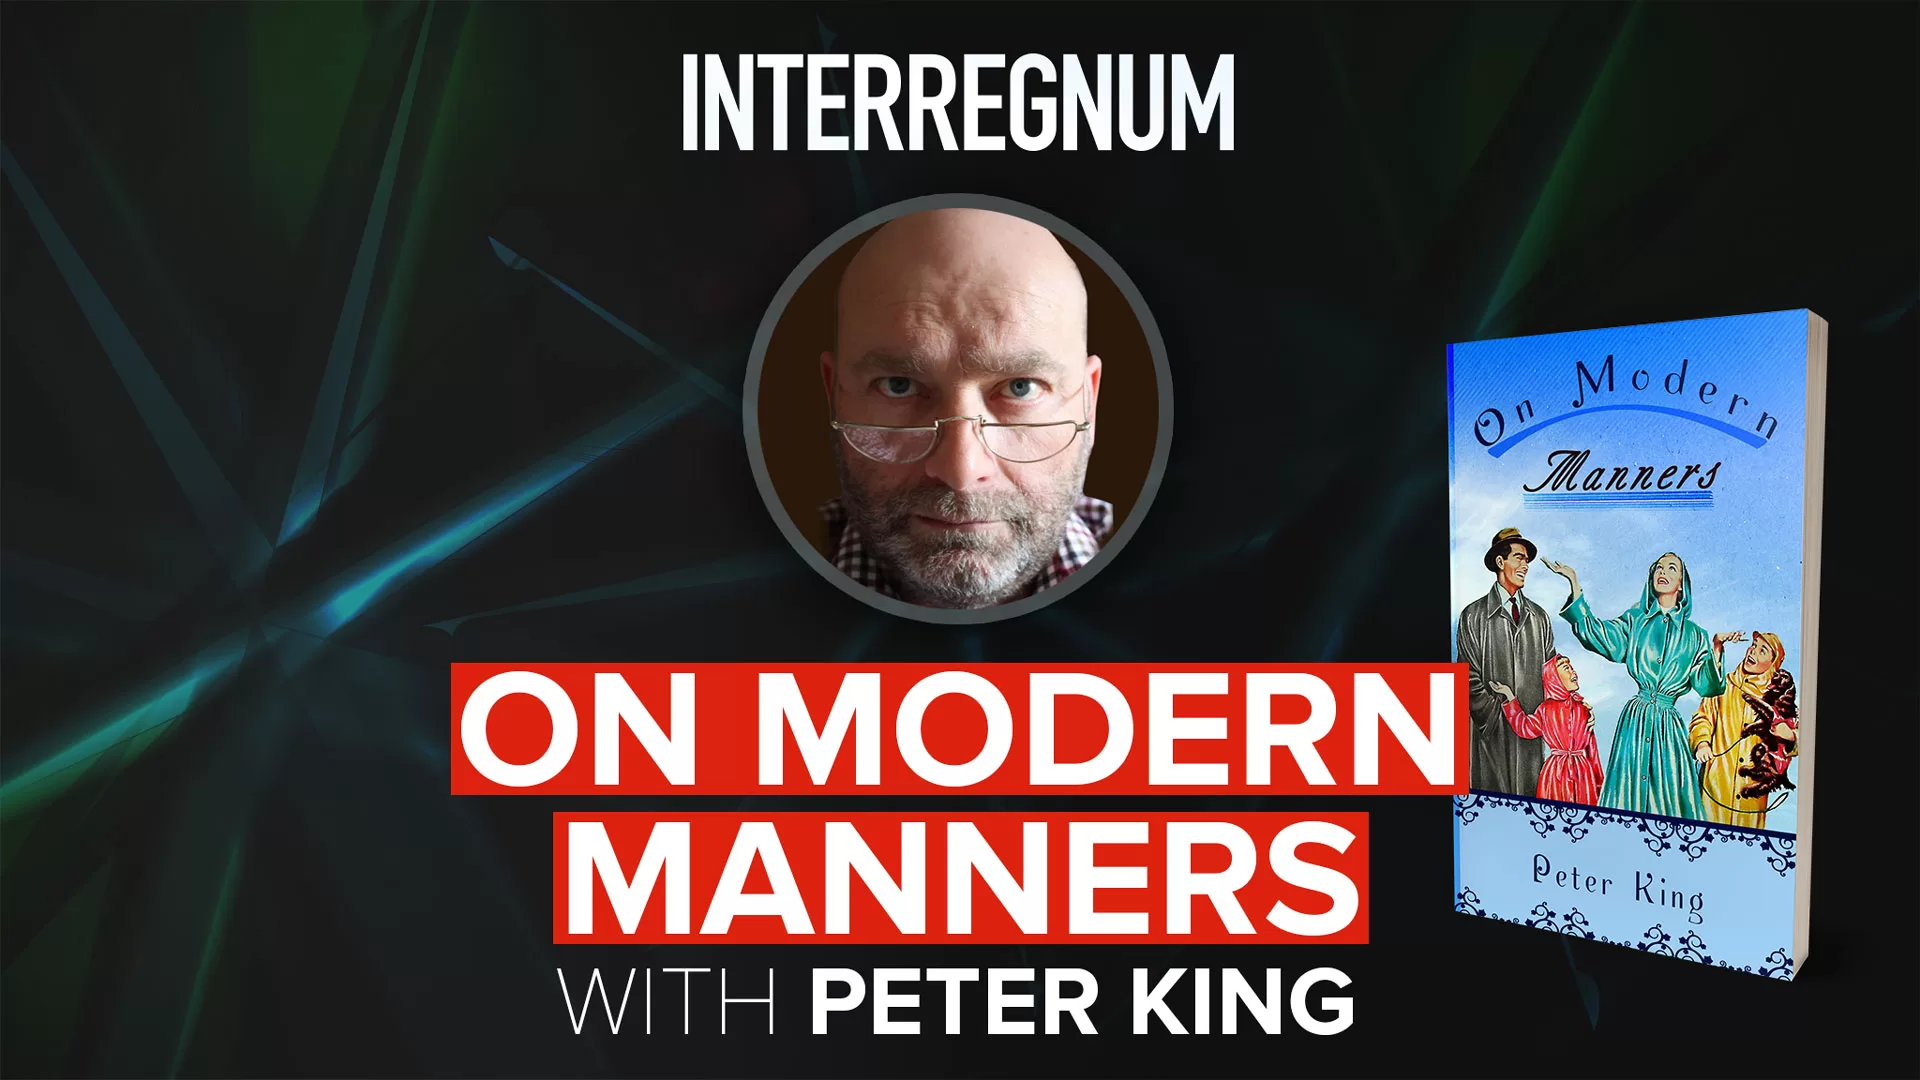 On Modern Manners with Peter King